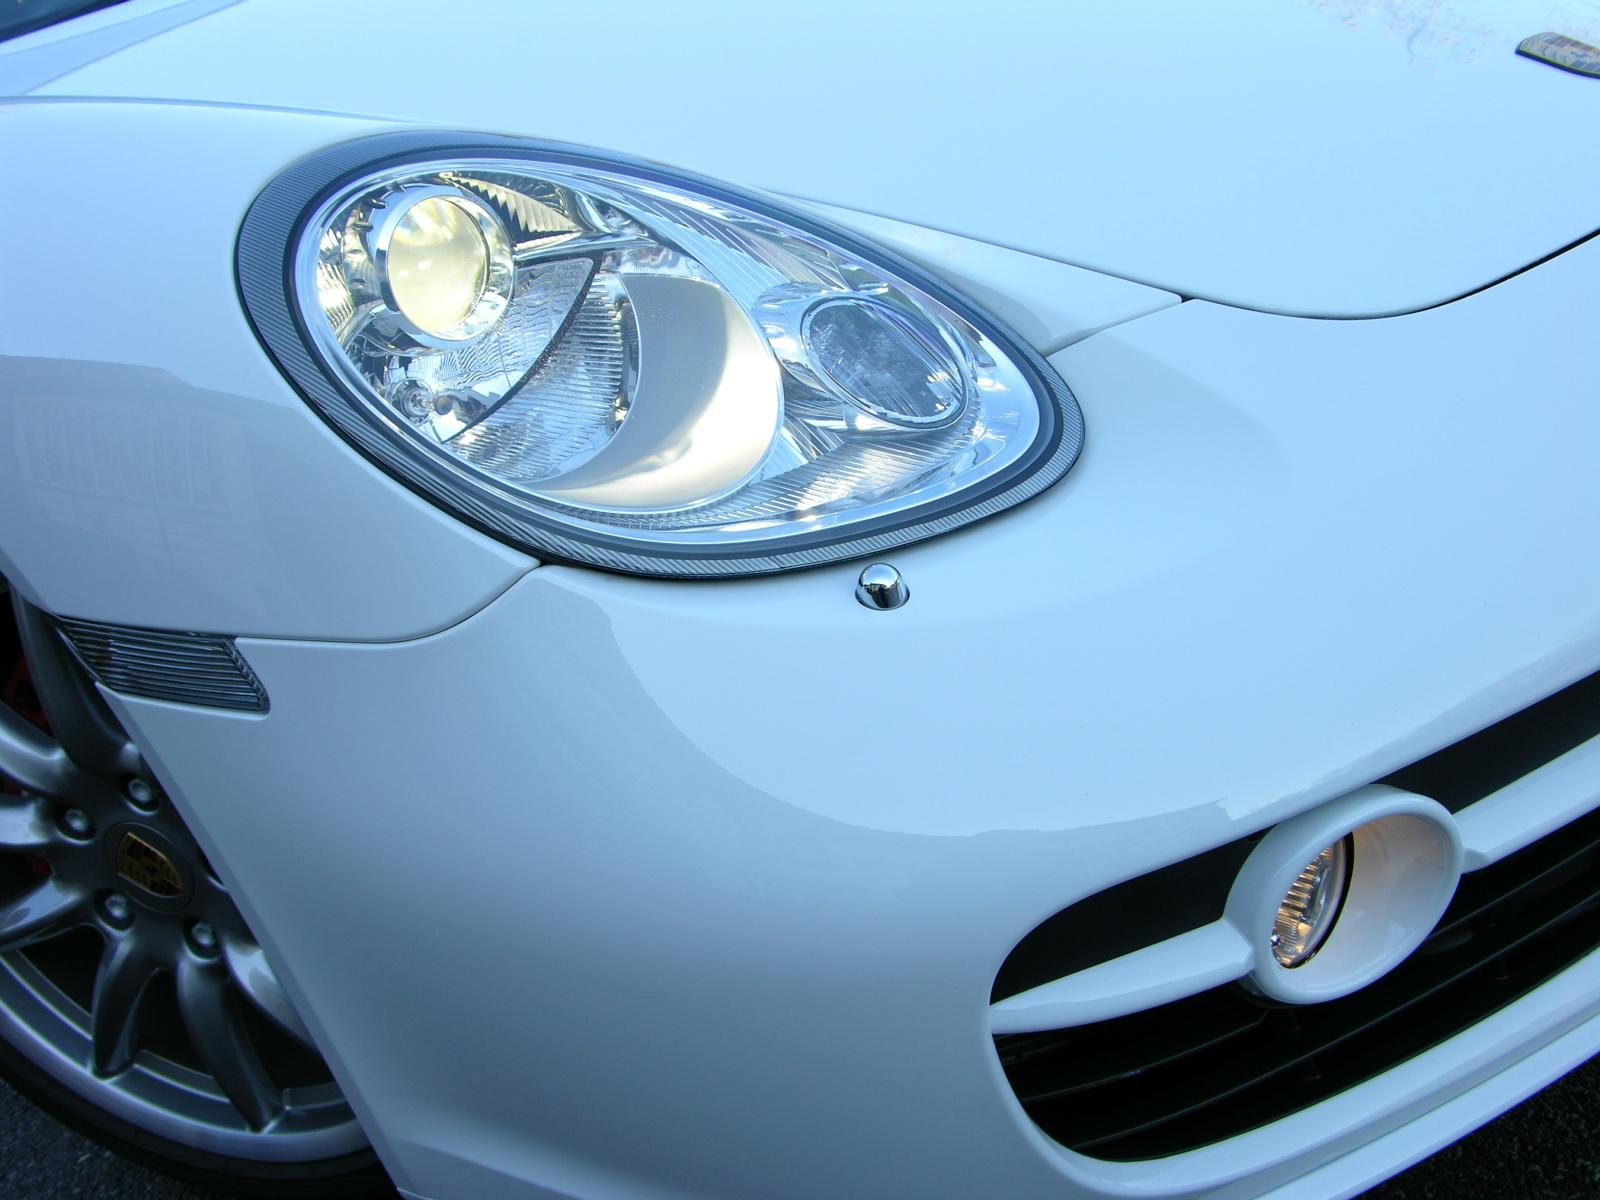 this is a close up view of a car headlight